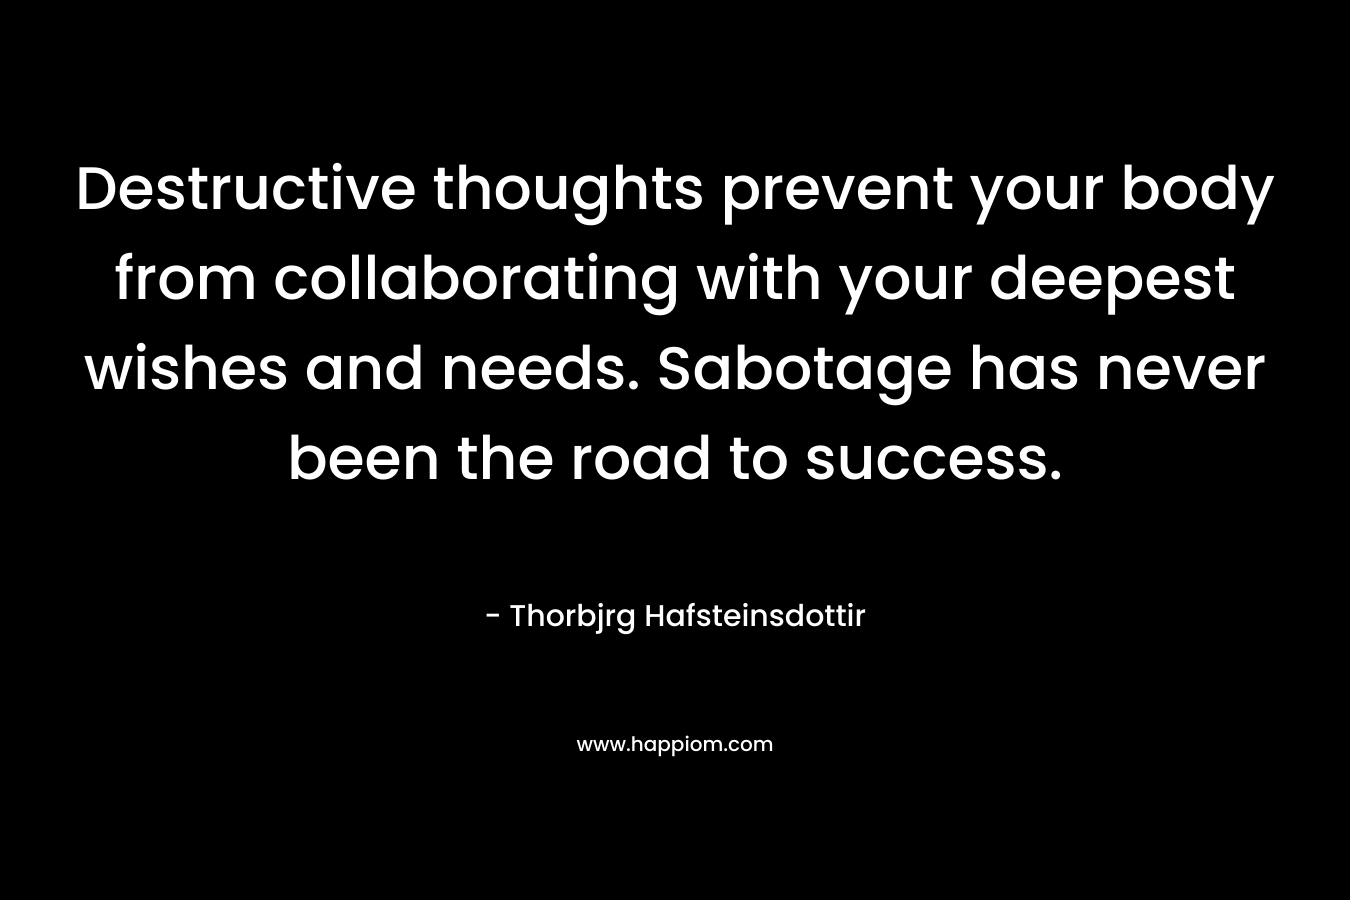 Destructive thoughts prevent your body from collaborating with your deepest wishes and needs. Sabotage has never been the road to success. – Thorbjrg Hafsteinsdottir